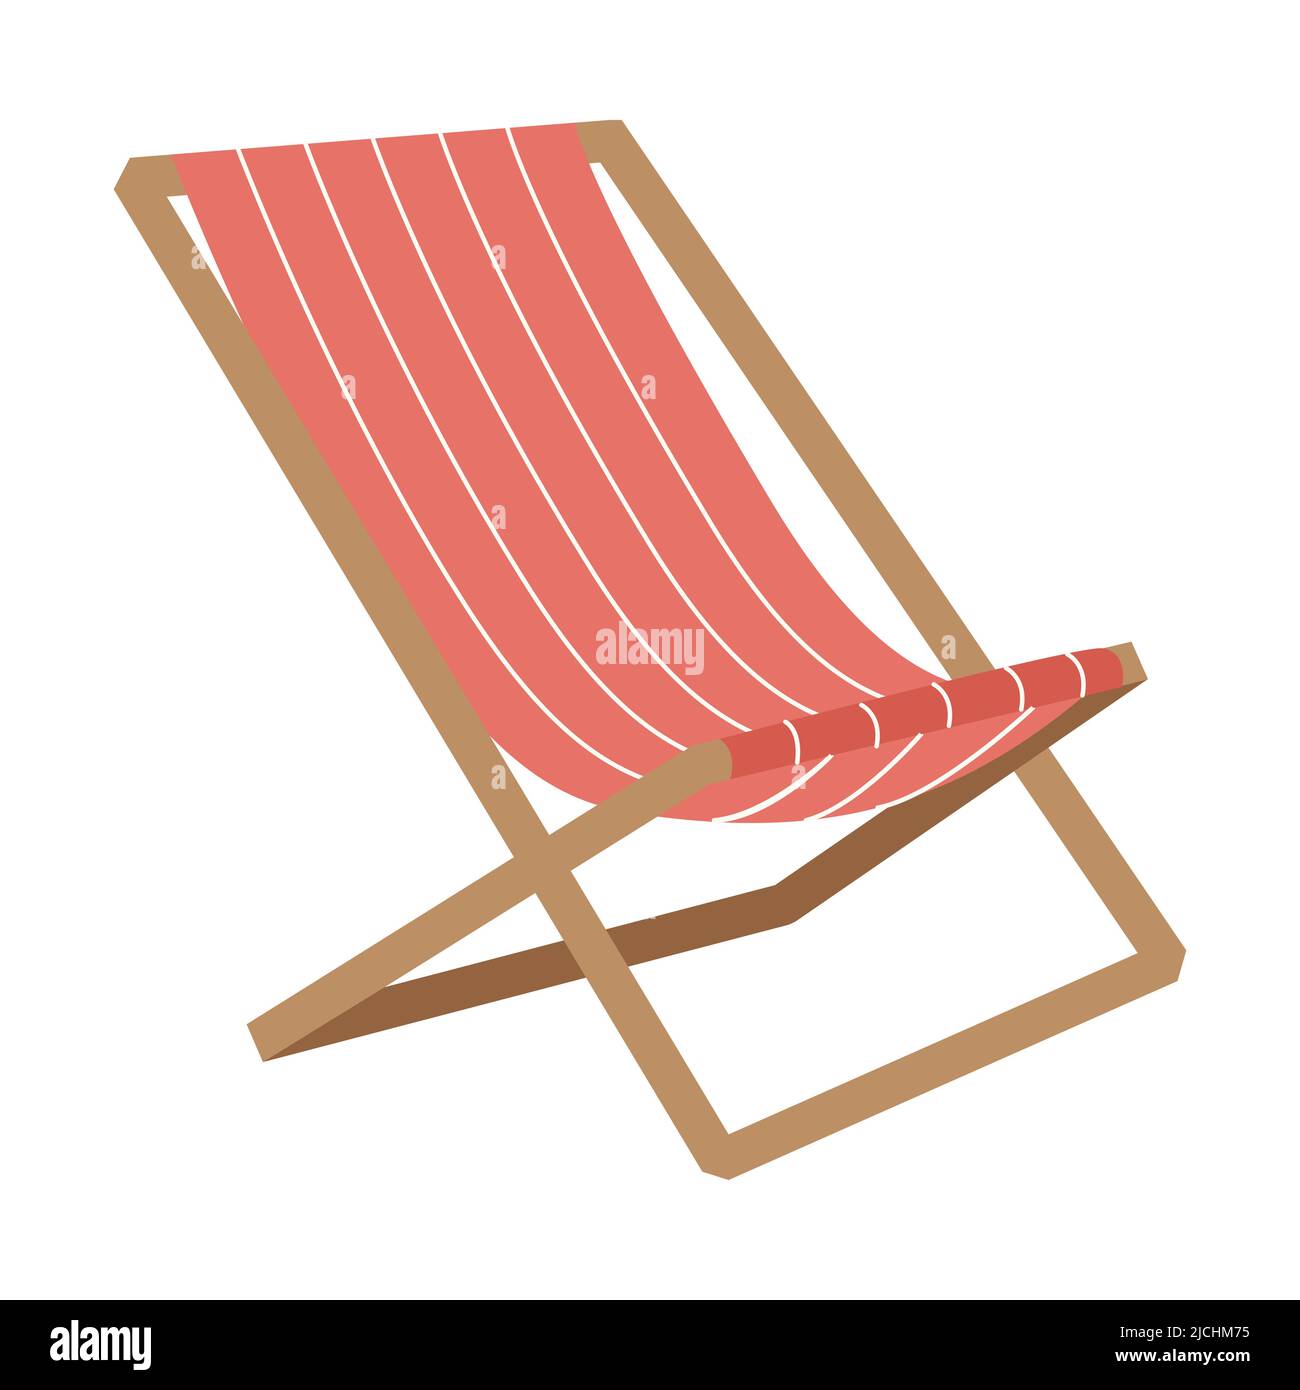 Tourist or beach folding chair. Equipment for camping, car travel, garden, beach. A piece of outdoor furniture. Flat vector illustration isolated on a Stock Vector